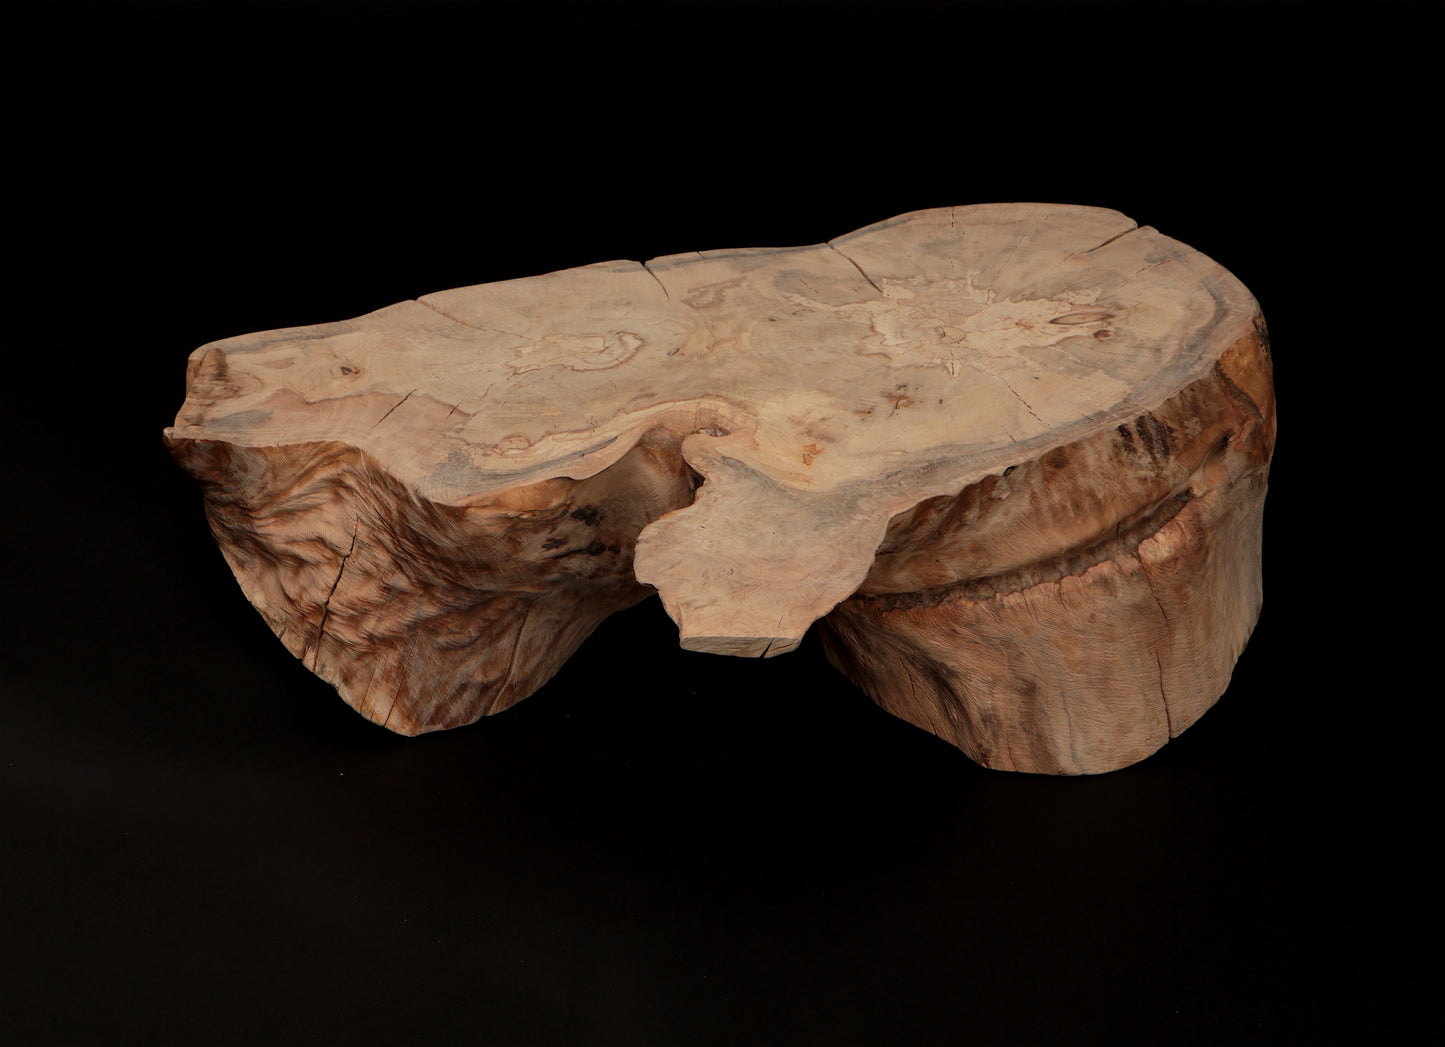 Spalted Coffee Table